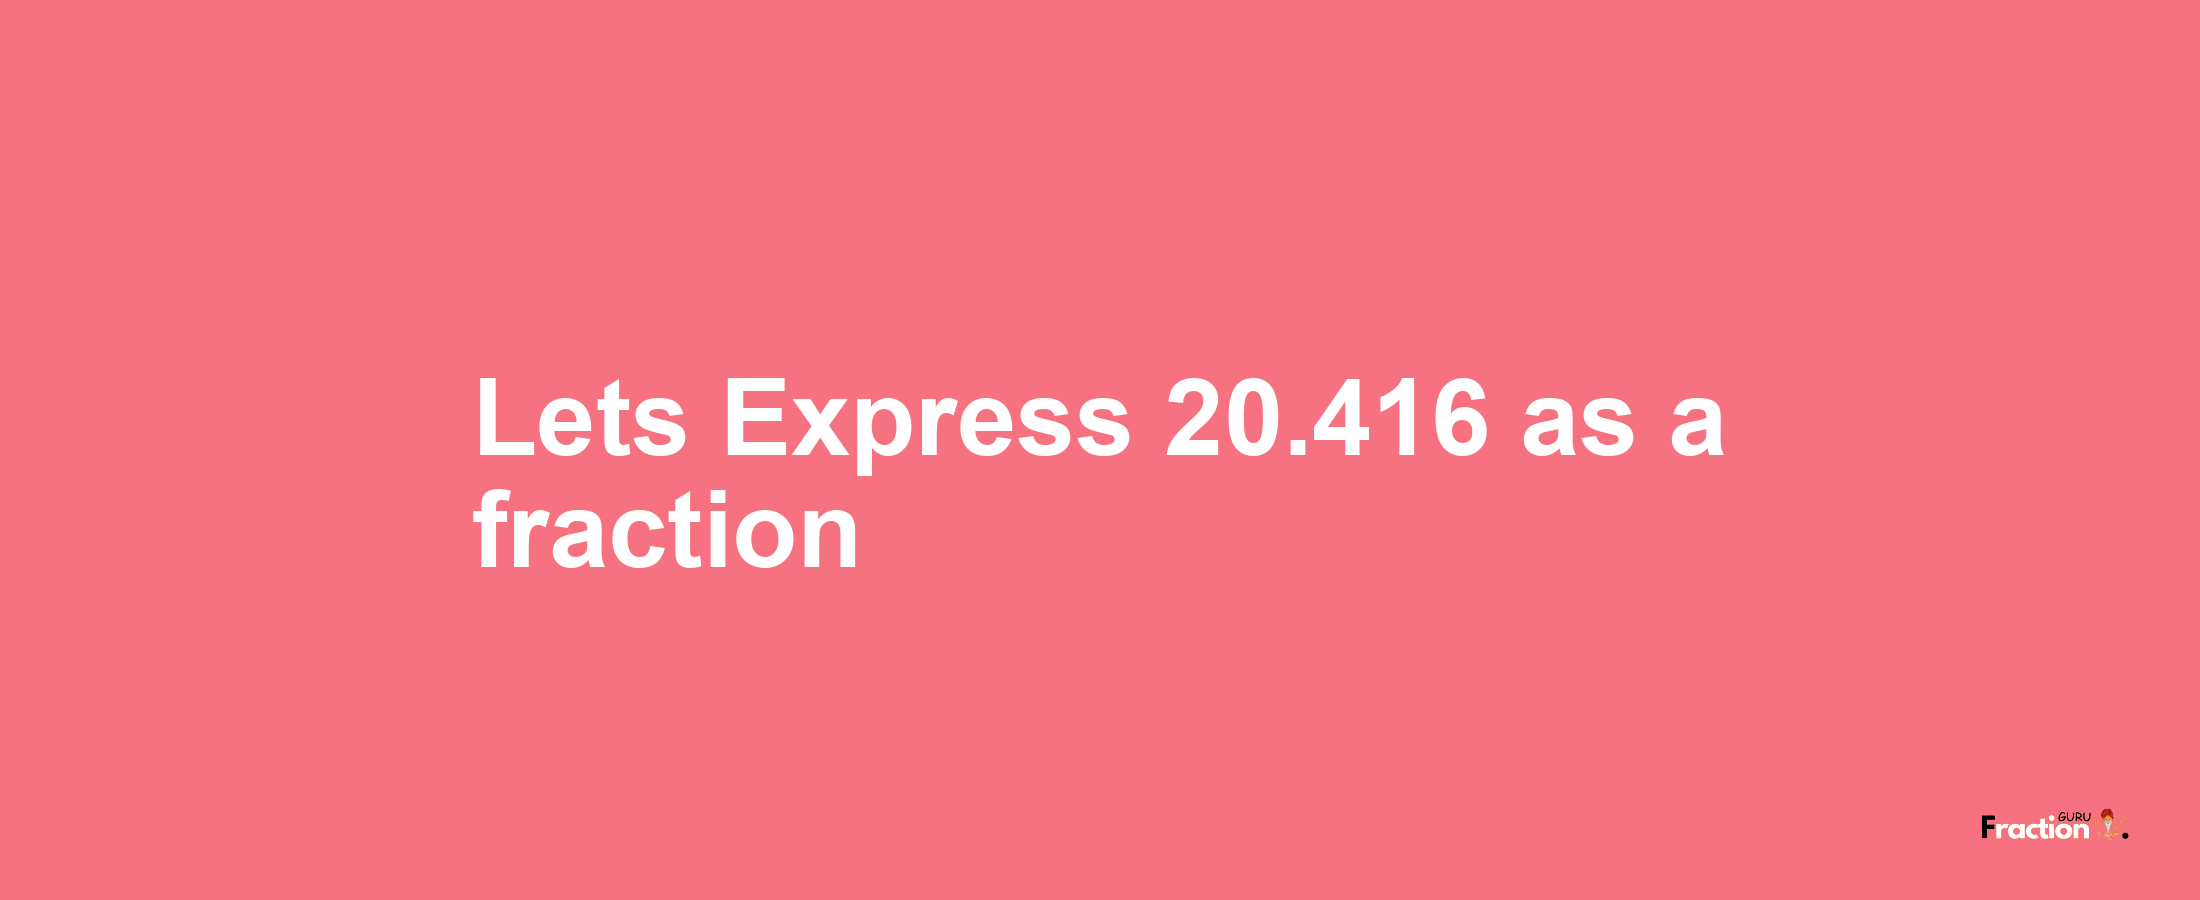 Lets Express 20.416 as afraction